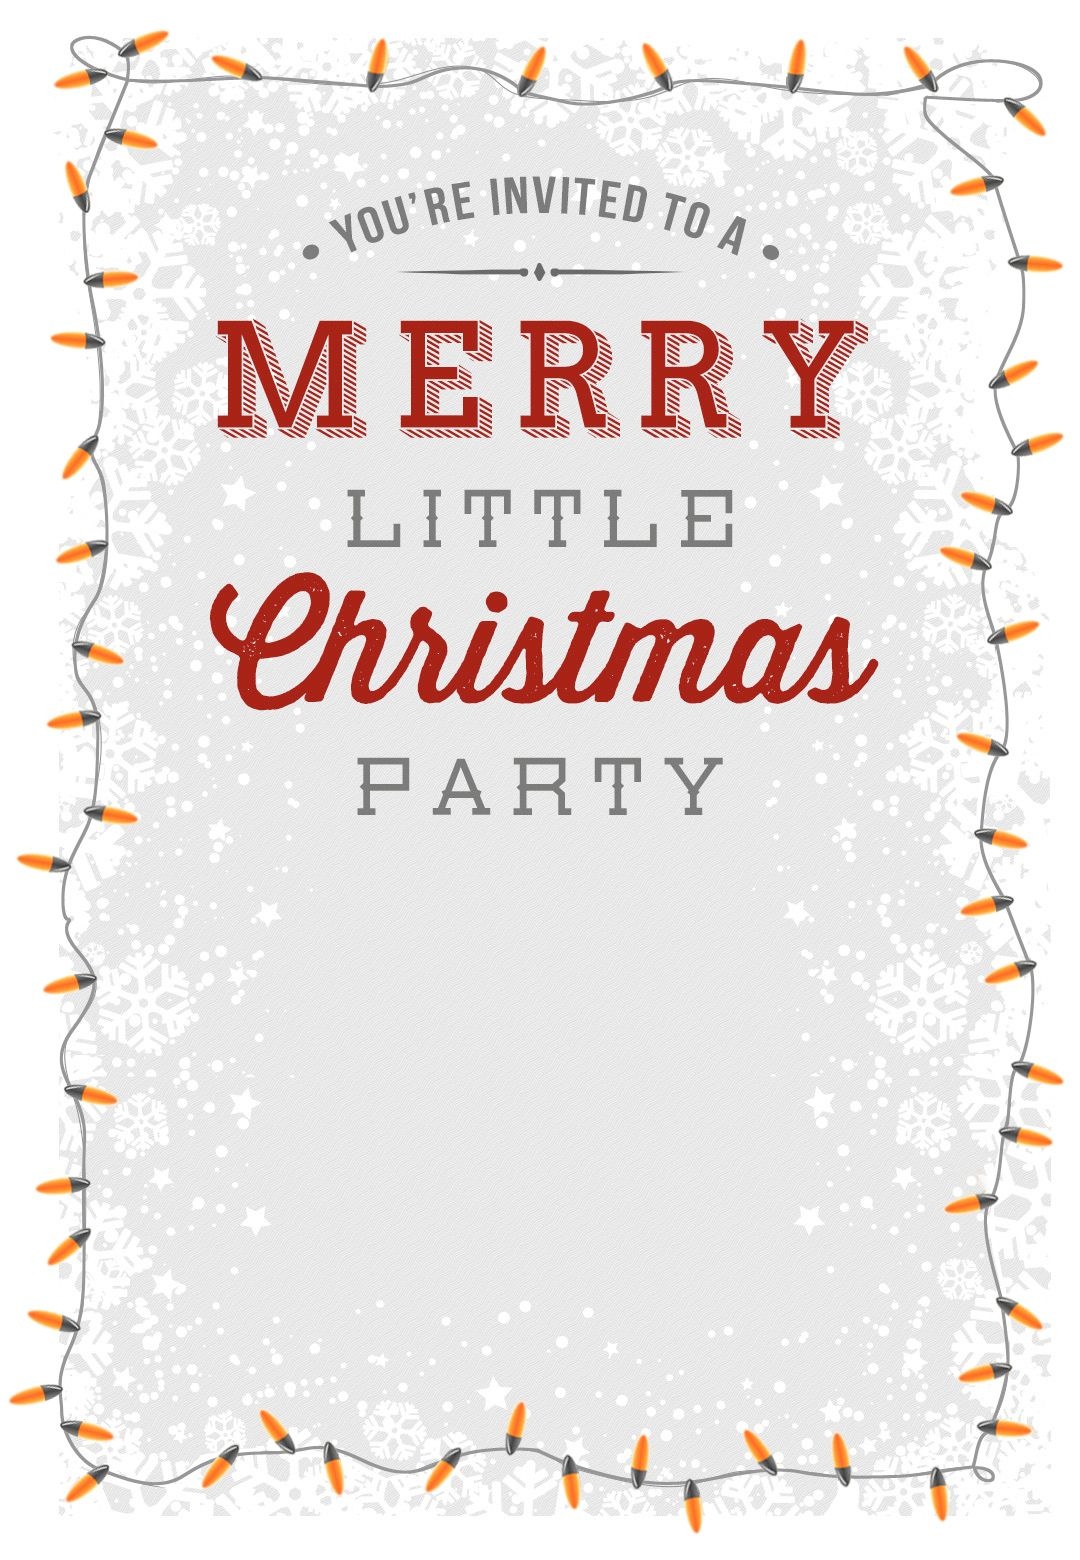 A Merry Little Party - Free Printable Christmas Invitation Template - Free Printable Christmas Party Flyer Templates